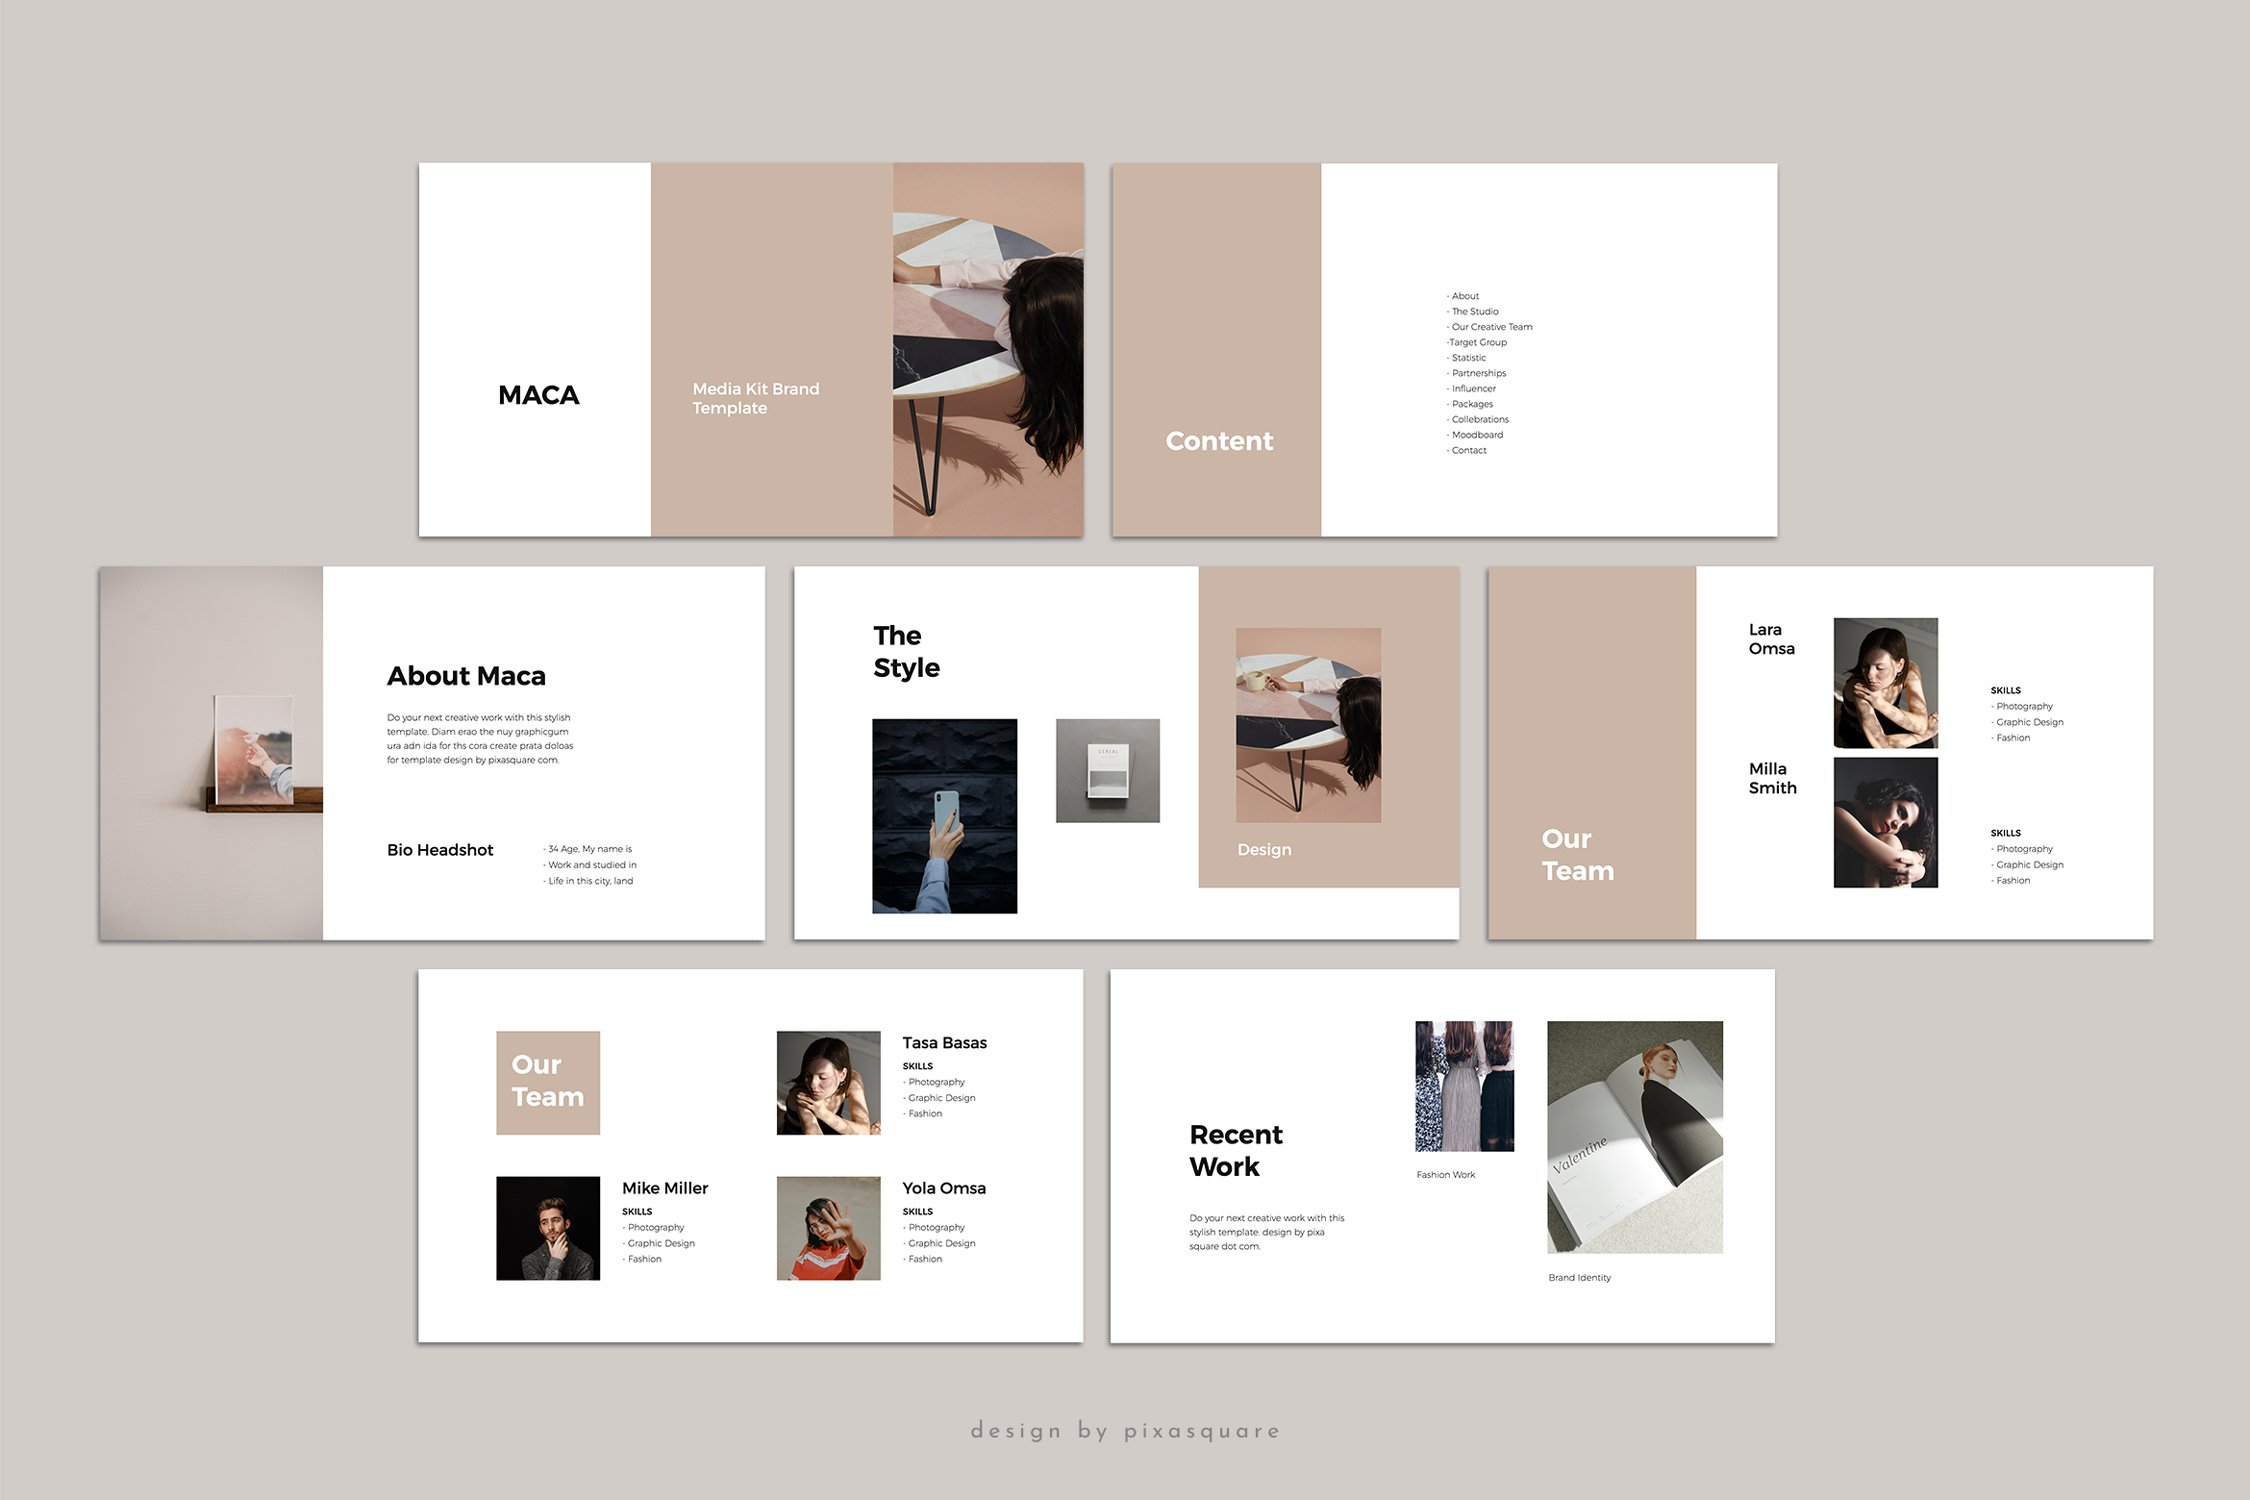 Cool stylish template in a minimalistic style.